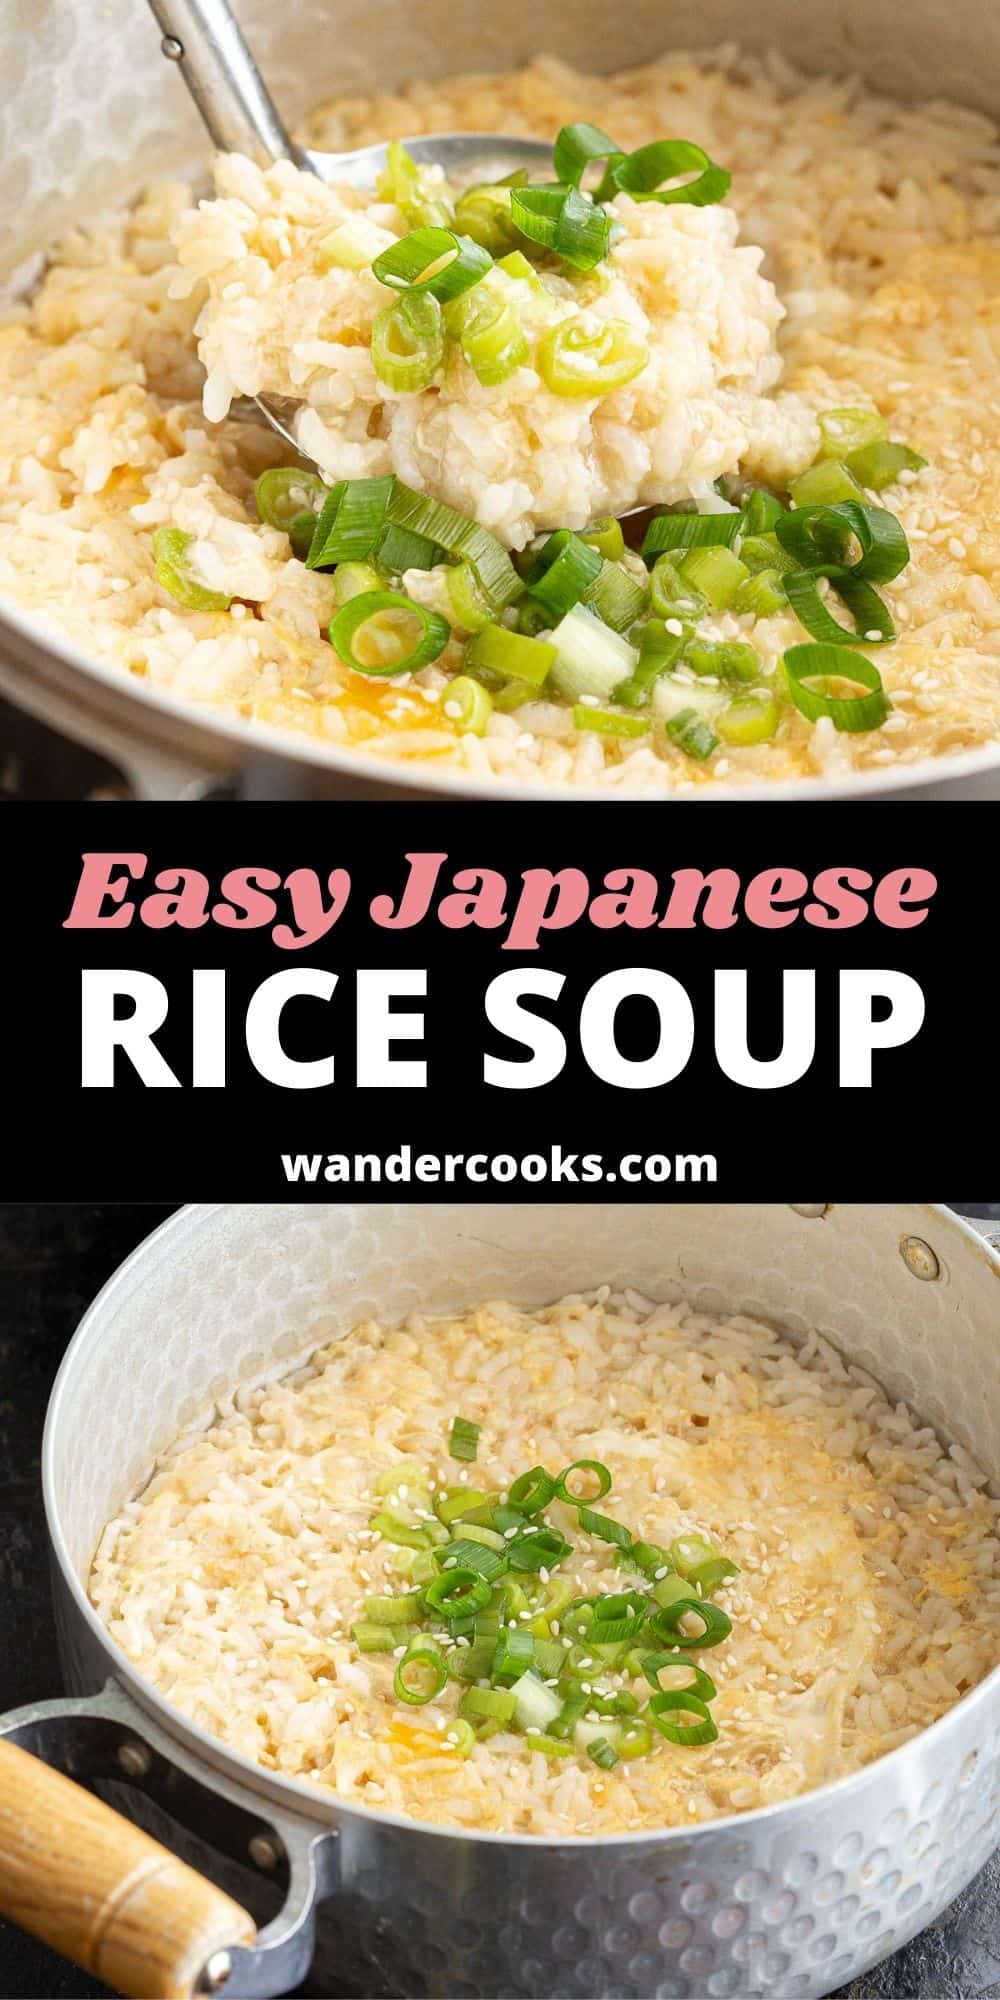 10 Minute Zosui - Quick Japanese Rice Soup